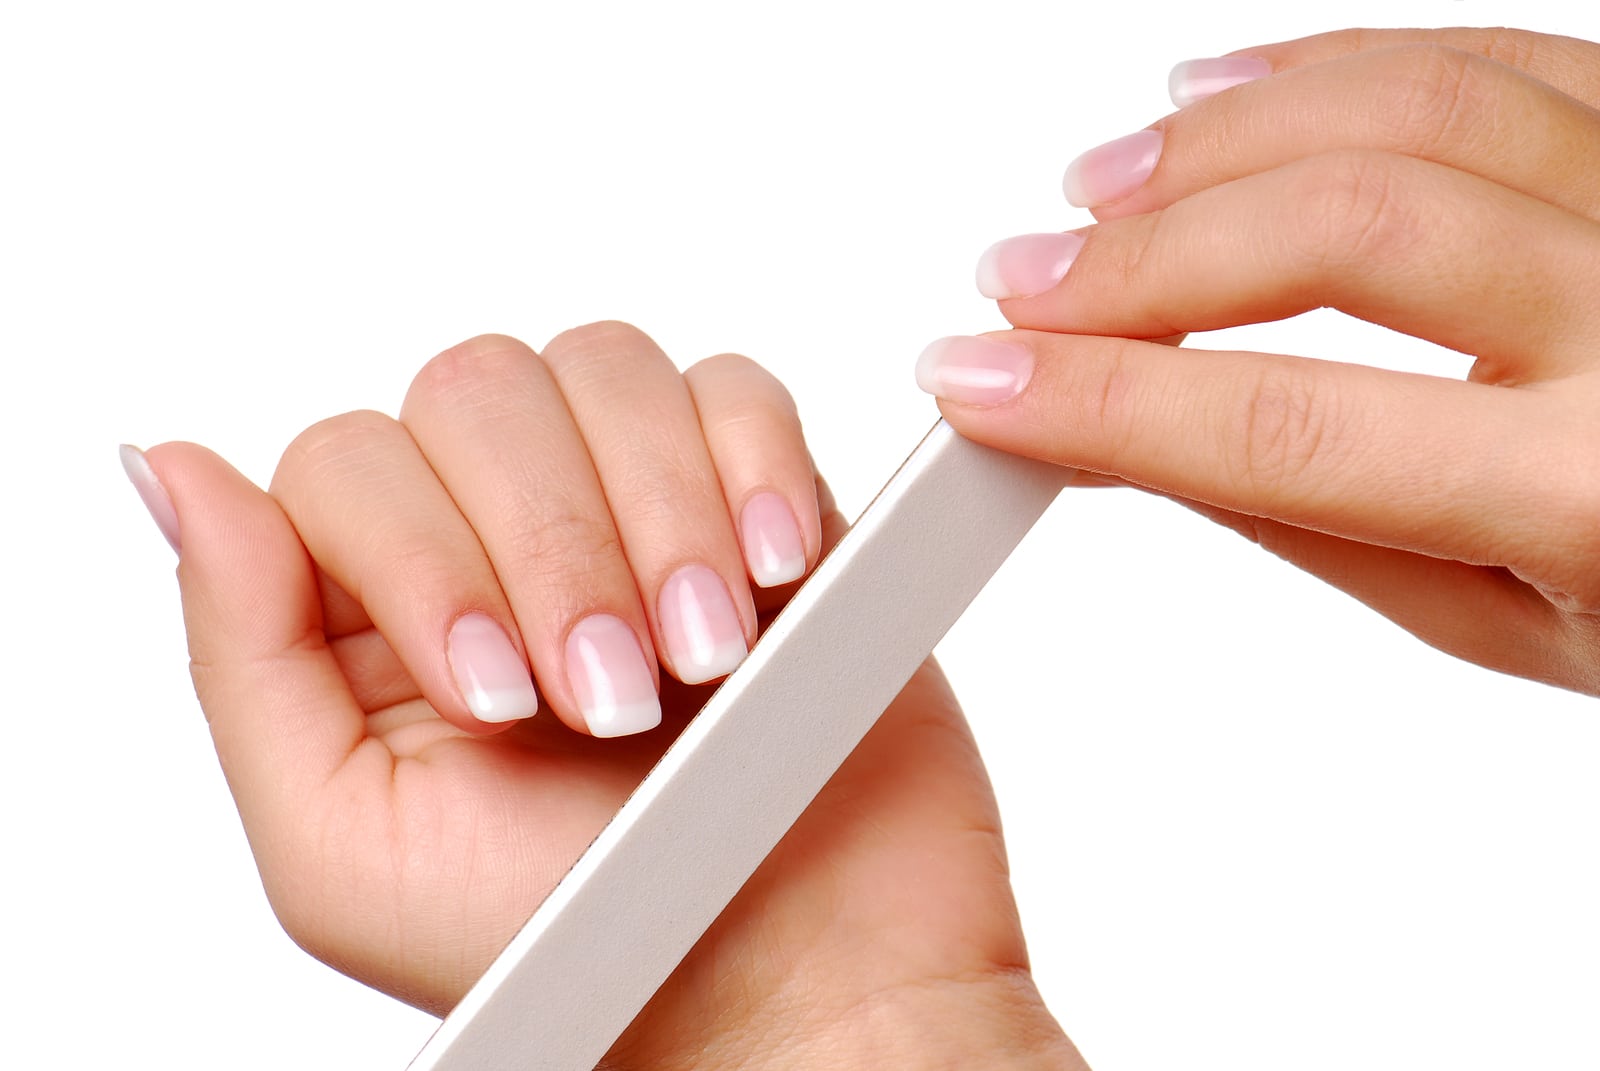 3. "Two-tone nails on one hand" - wide 4